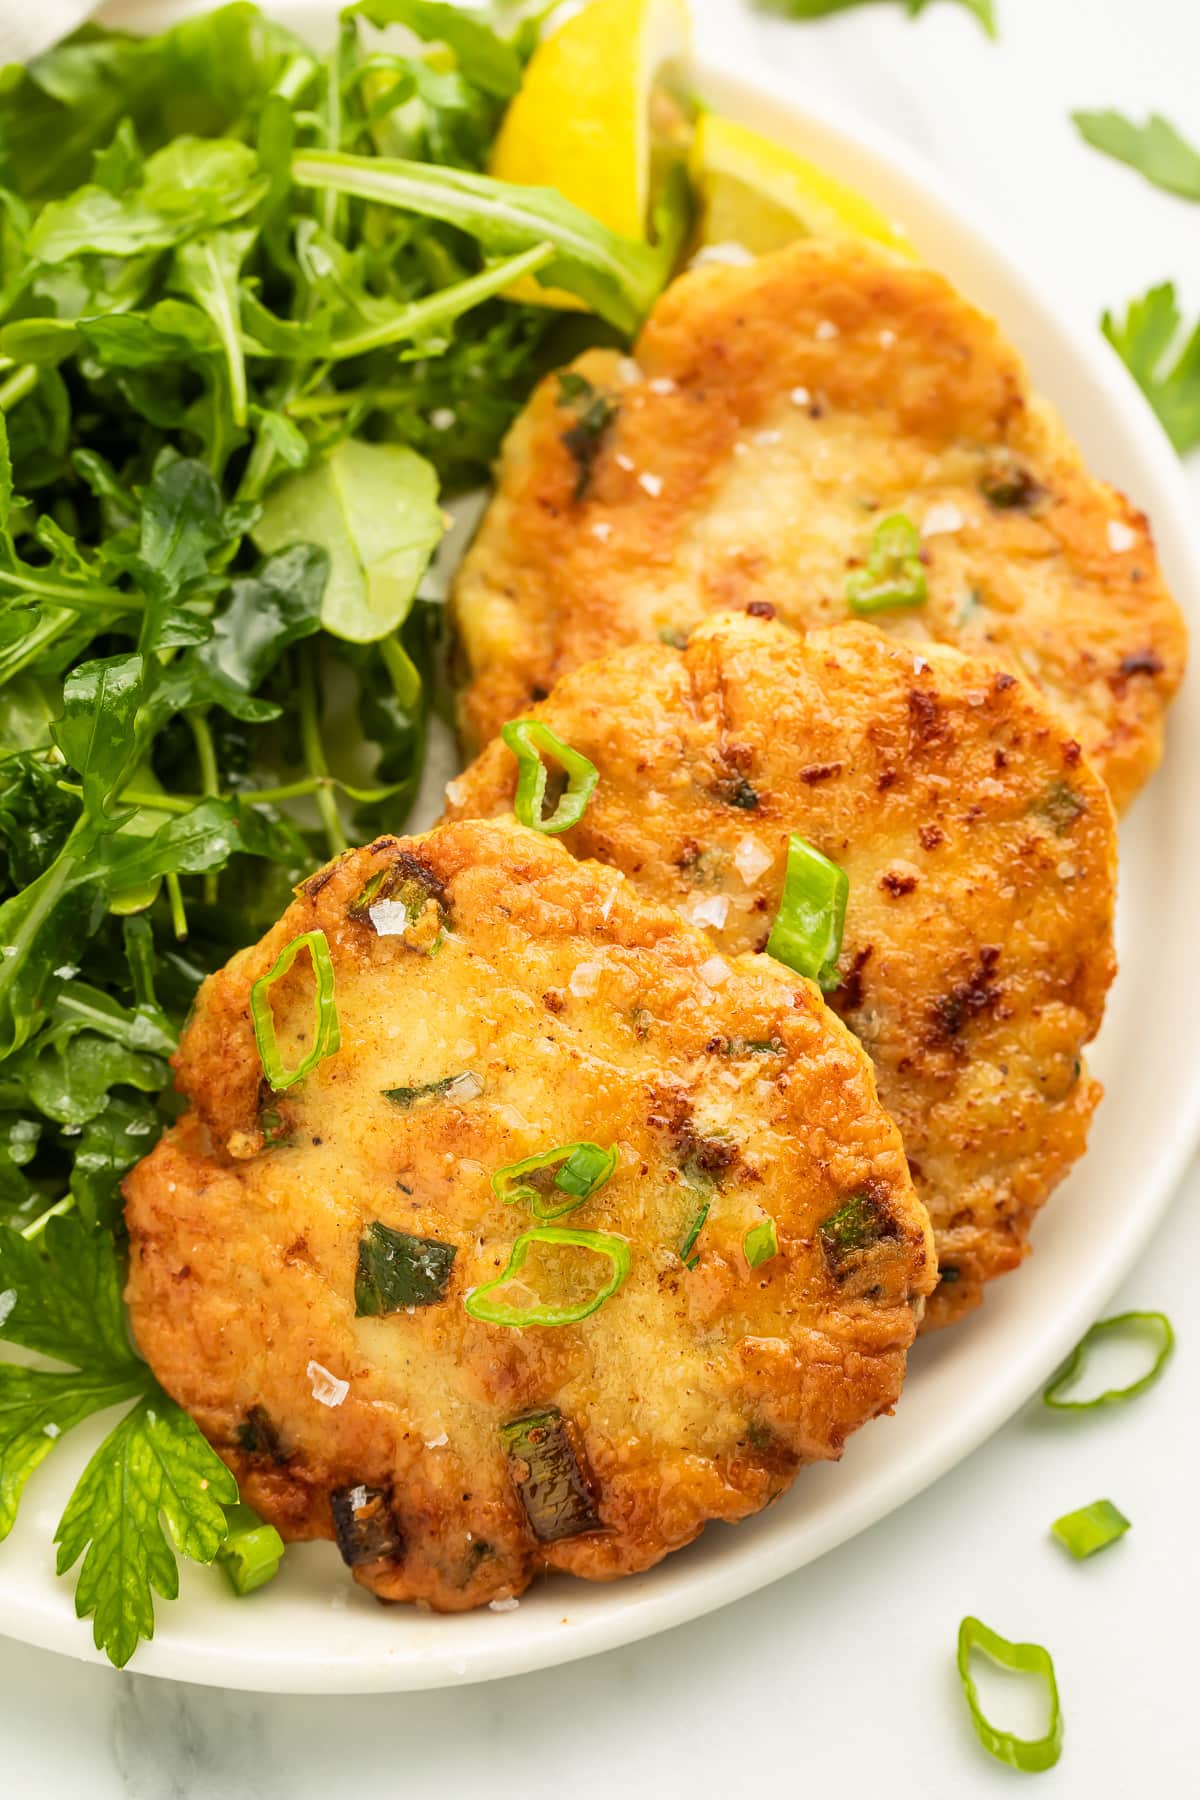 Three pan-fried, golden chicken patties arranged on a white plate with a leafy green side salad.